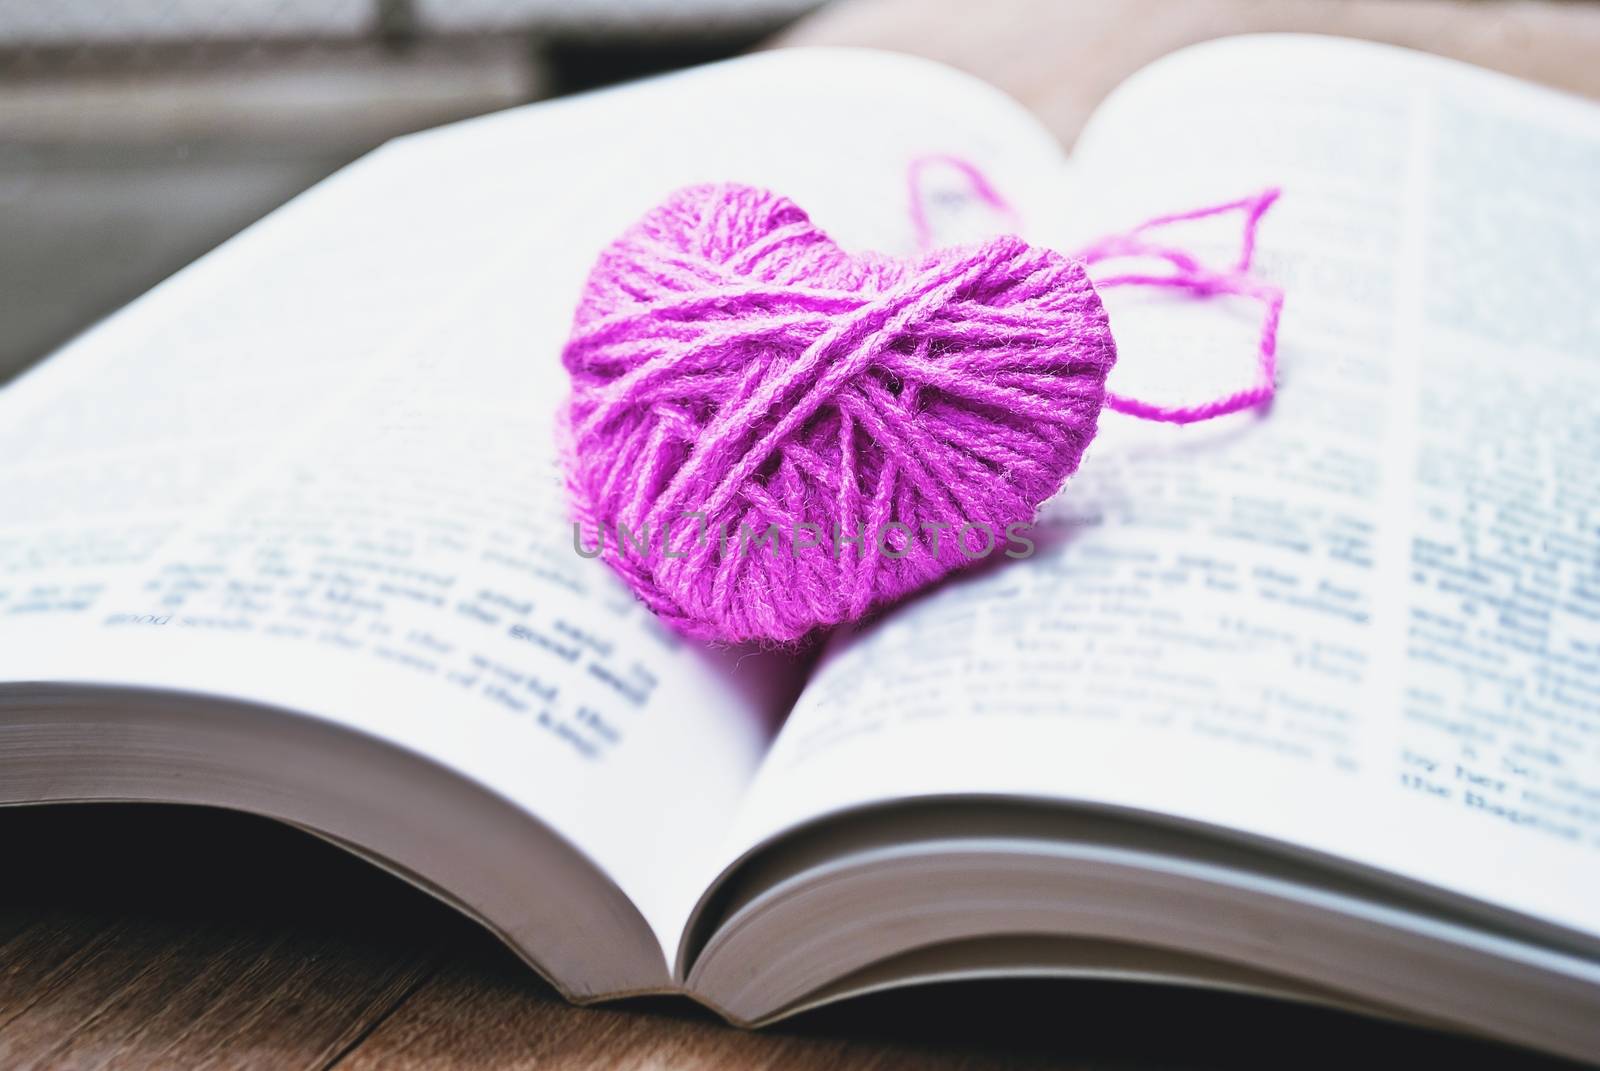 pink heart knitting wool put on the book, for valentine's day by rakoptonLPN